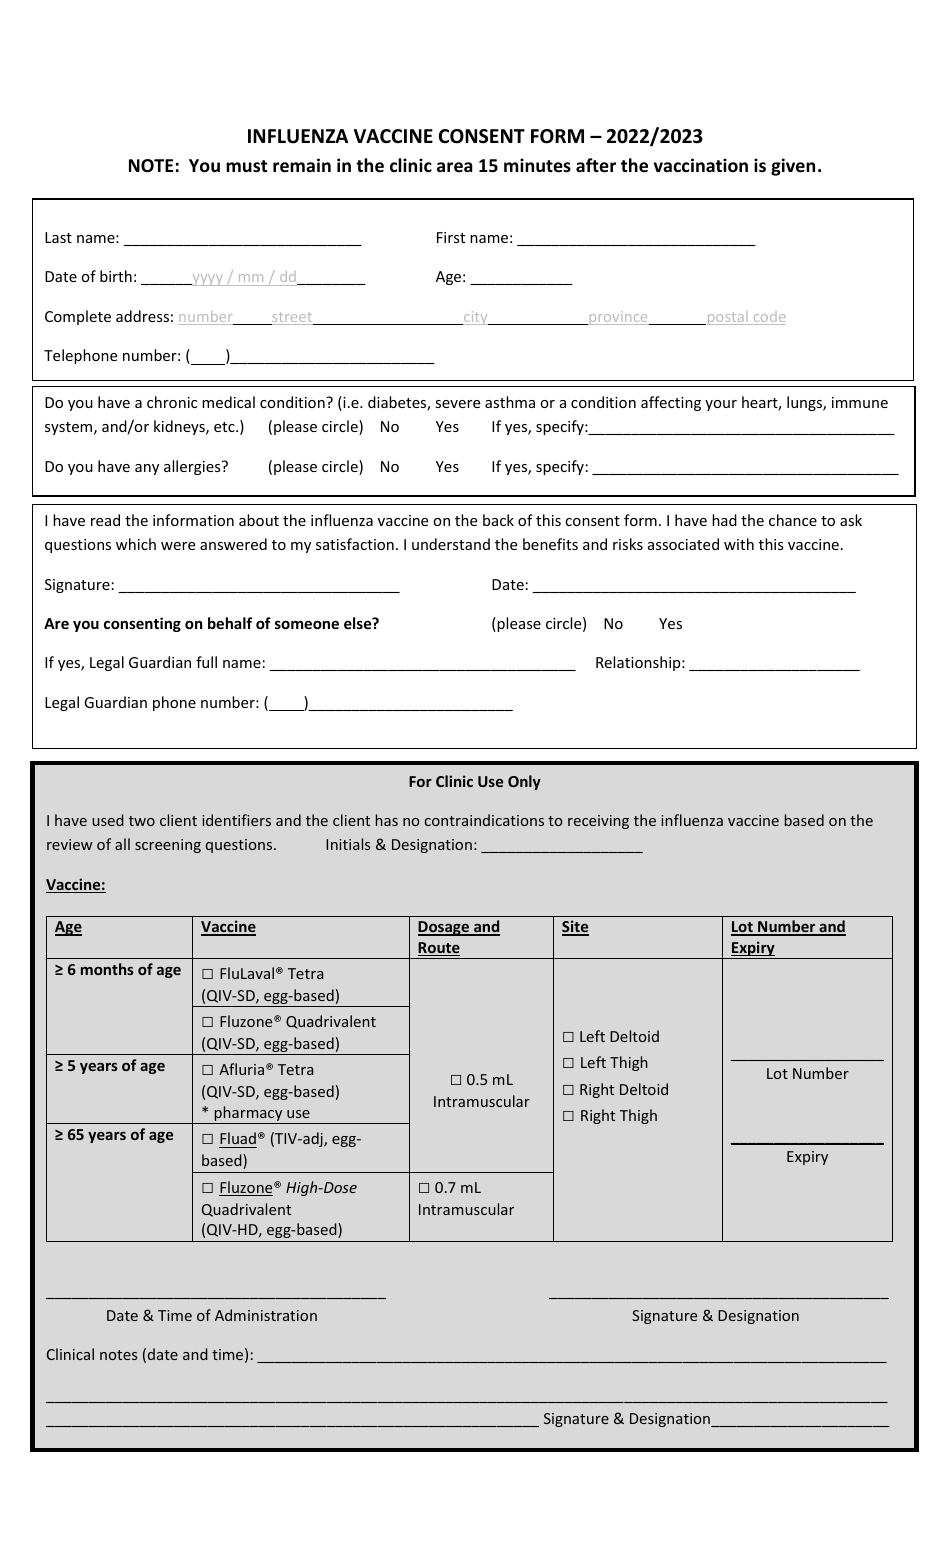 Influenza Vaccine Consent Form, Page 1